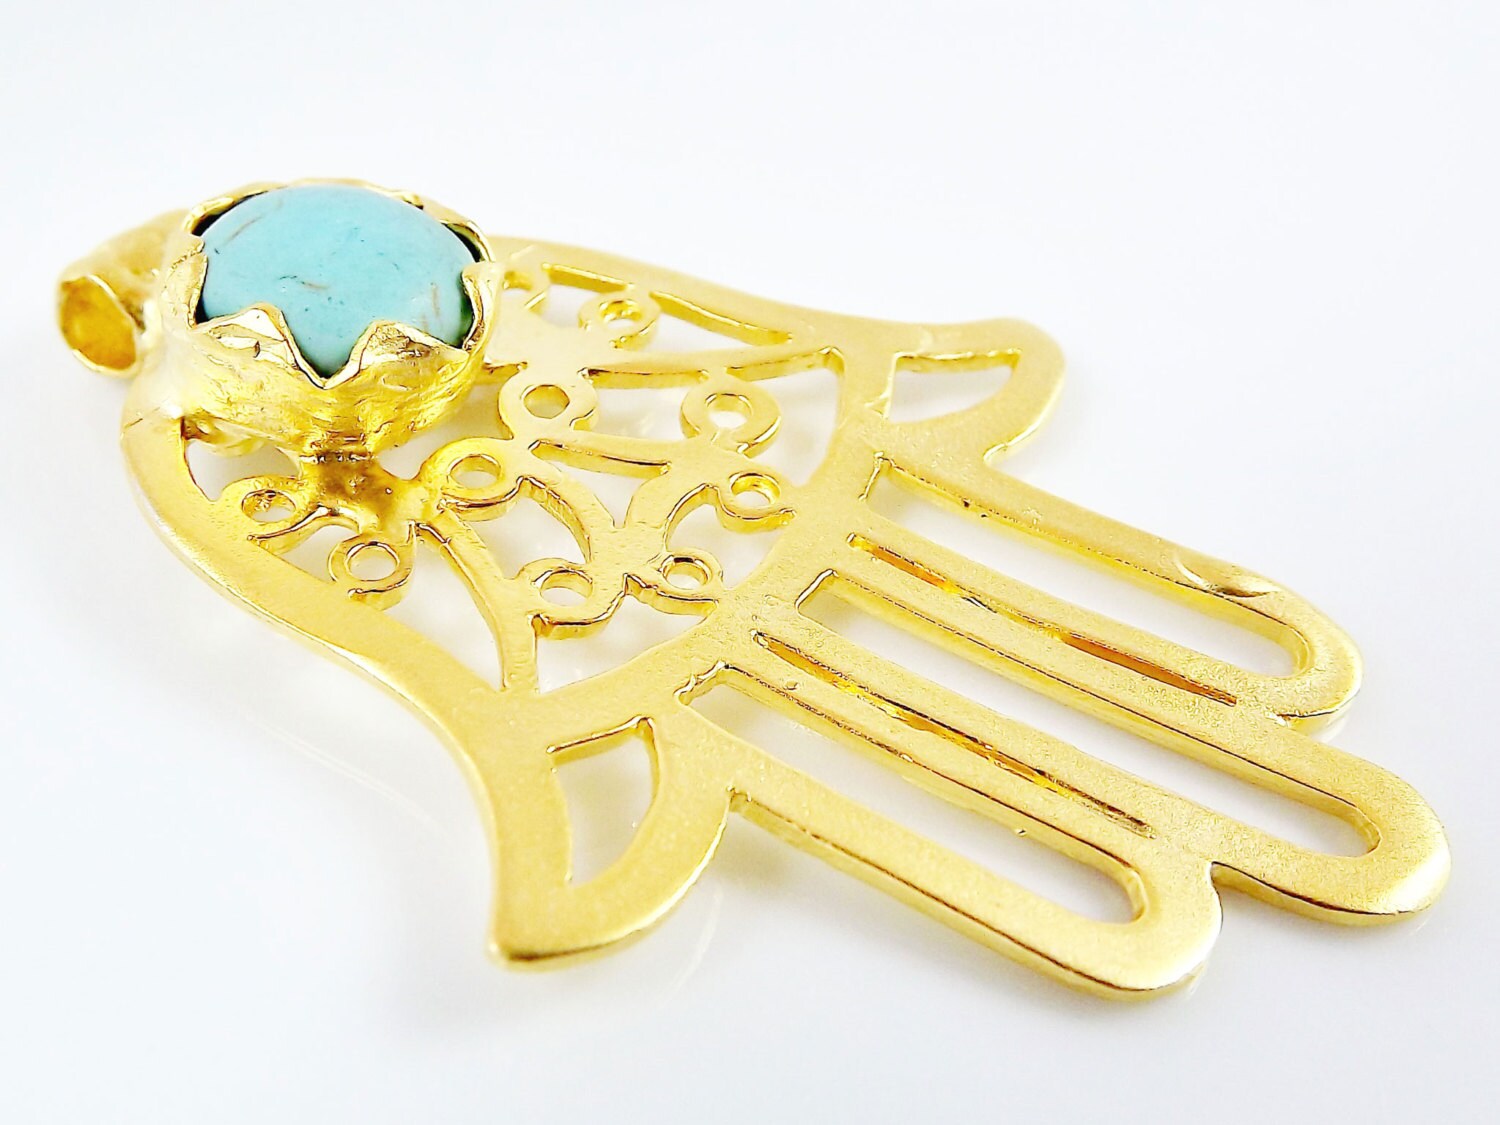 Gold Fretwork Hamsa Hand of Fatima Pendant with Turquoise Stone Accent, 22k Matte Gold plated 1pc